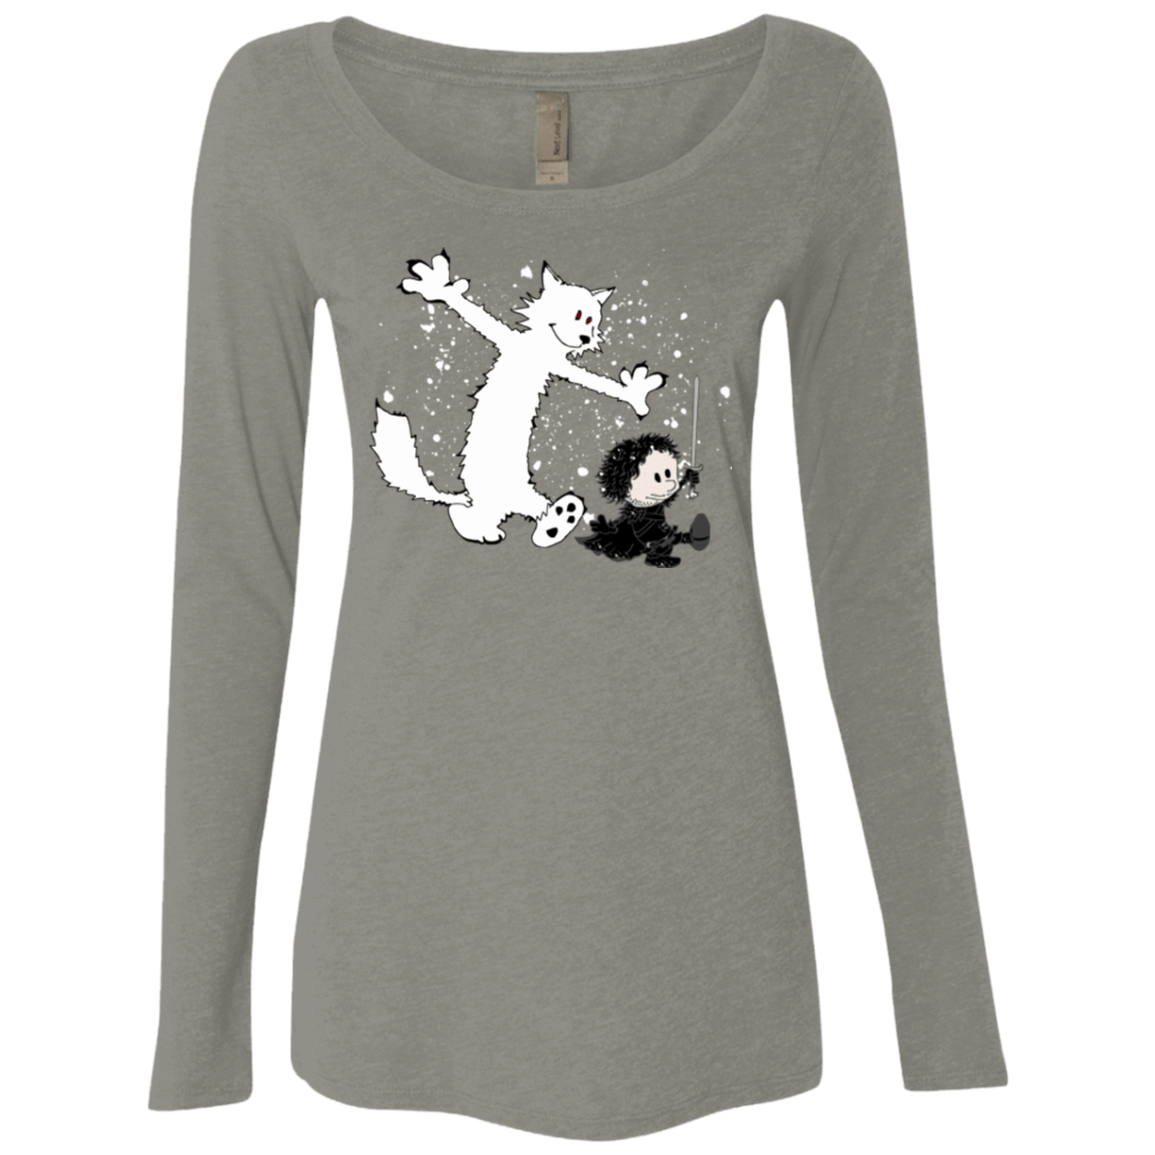 T-Shirts Venetian Grey / Small Ghost And Snow Women's Triblend Long Sleeve Shirt